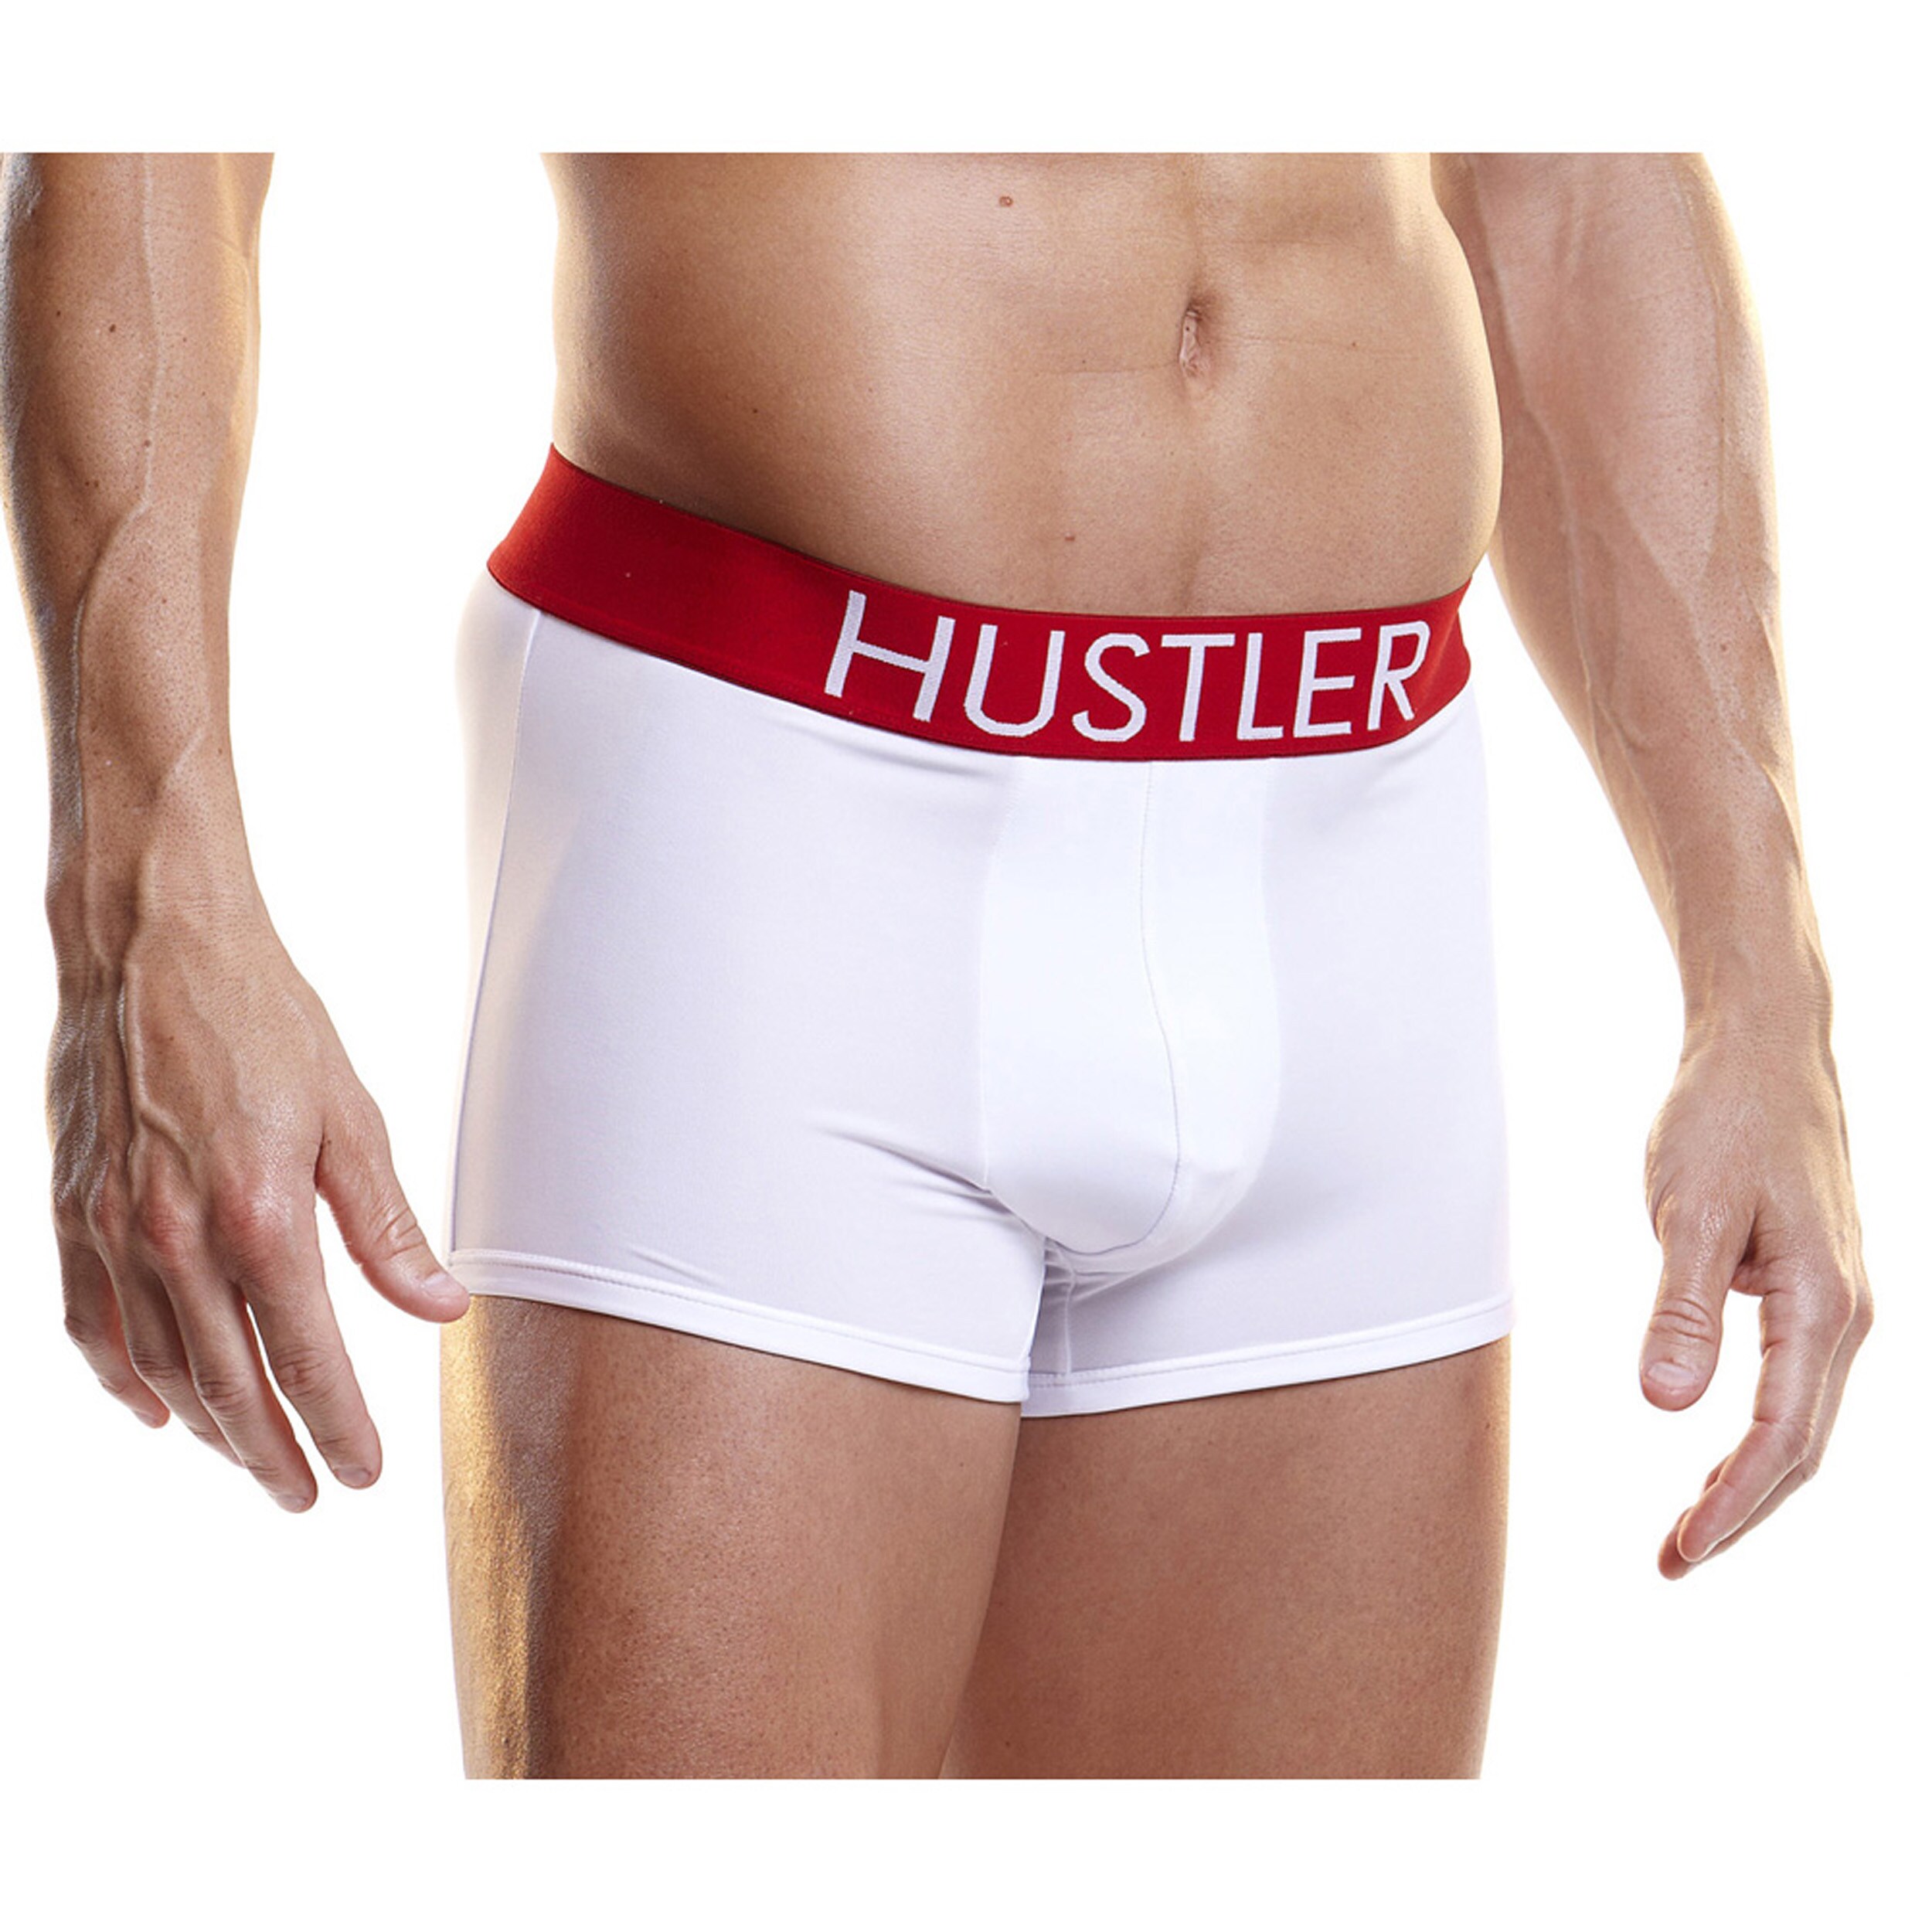 Hustler Logo White Microfiber Trunks (set Of 2) (WhiteSizes Medium, large, extra largeMaterials 90 percent polyester/ 10 percent spandex micro fabric Care instructions Hand wash cold recommended but can be machine washedModel MH1WHTSetof2Due to the pe